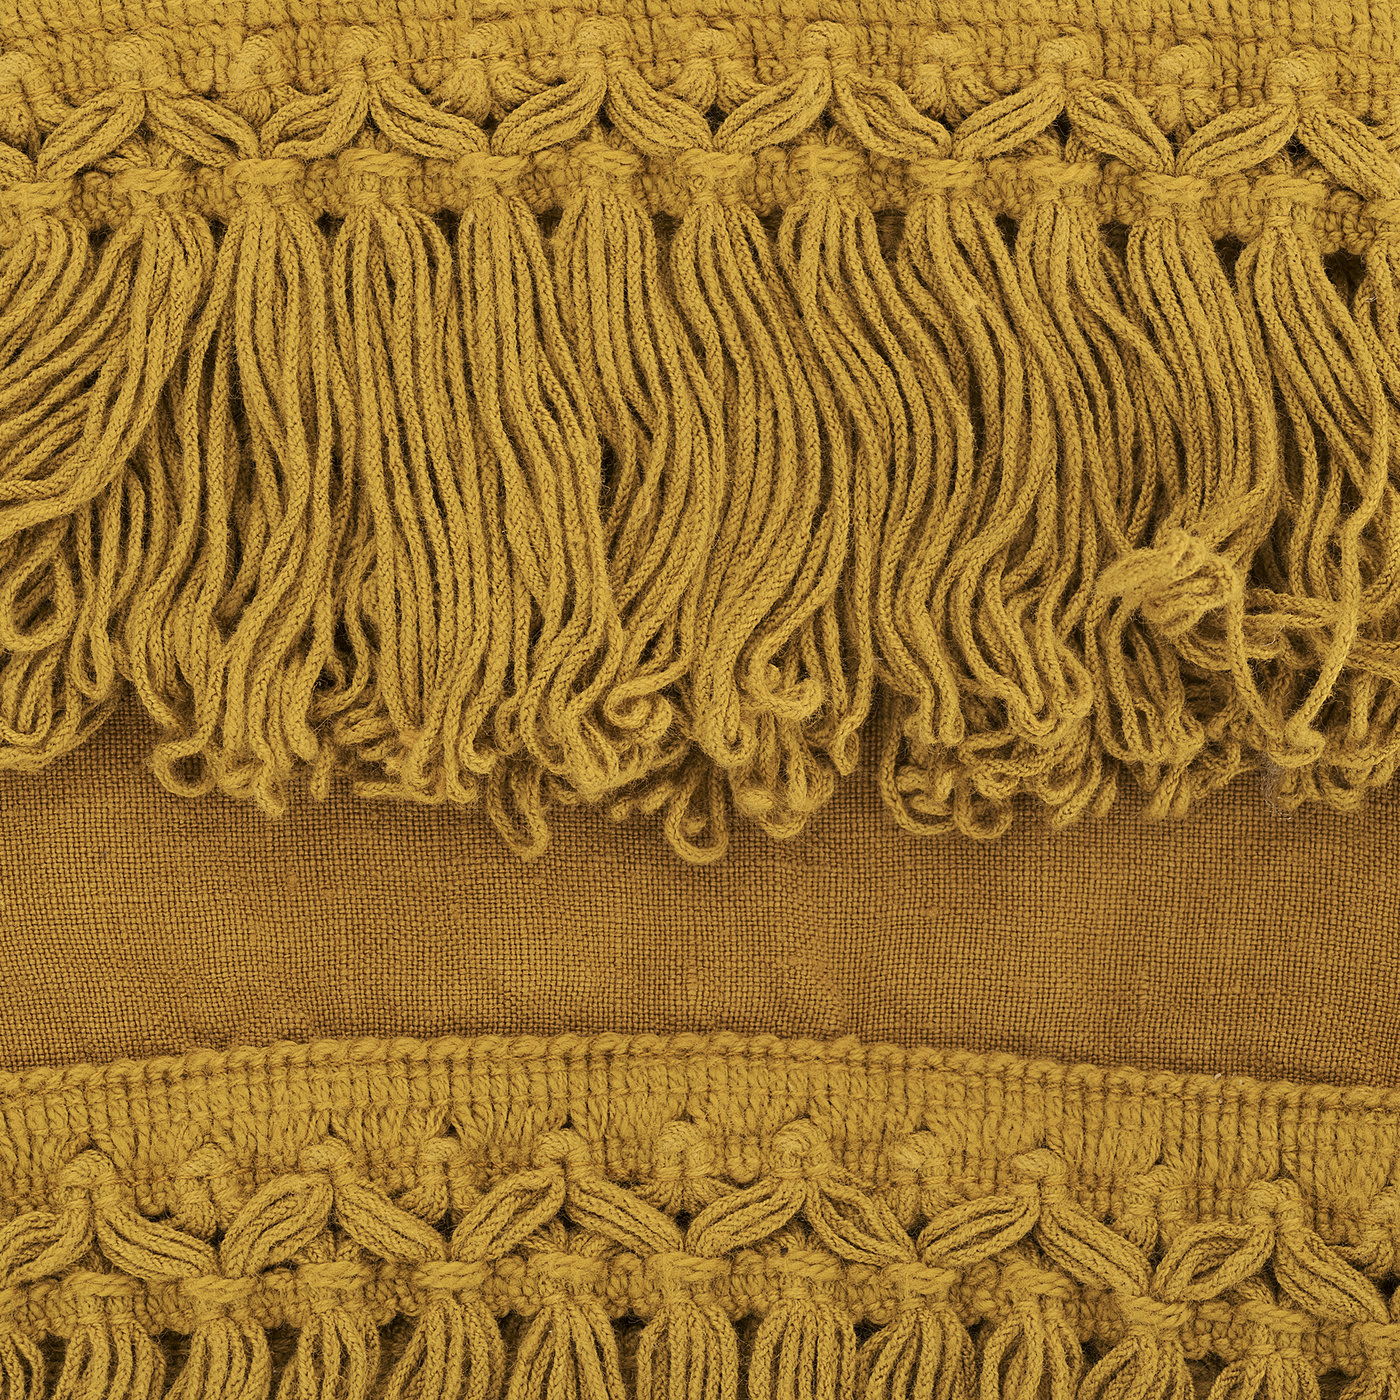 Set of 2 Mustard Linen Towels with Long Fringes - Once Milano